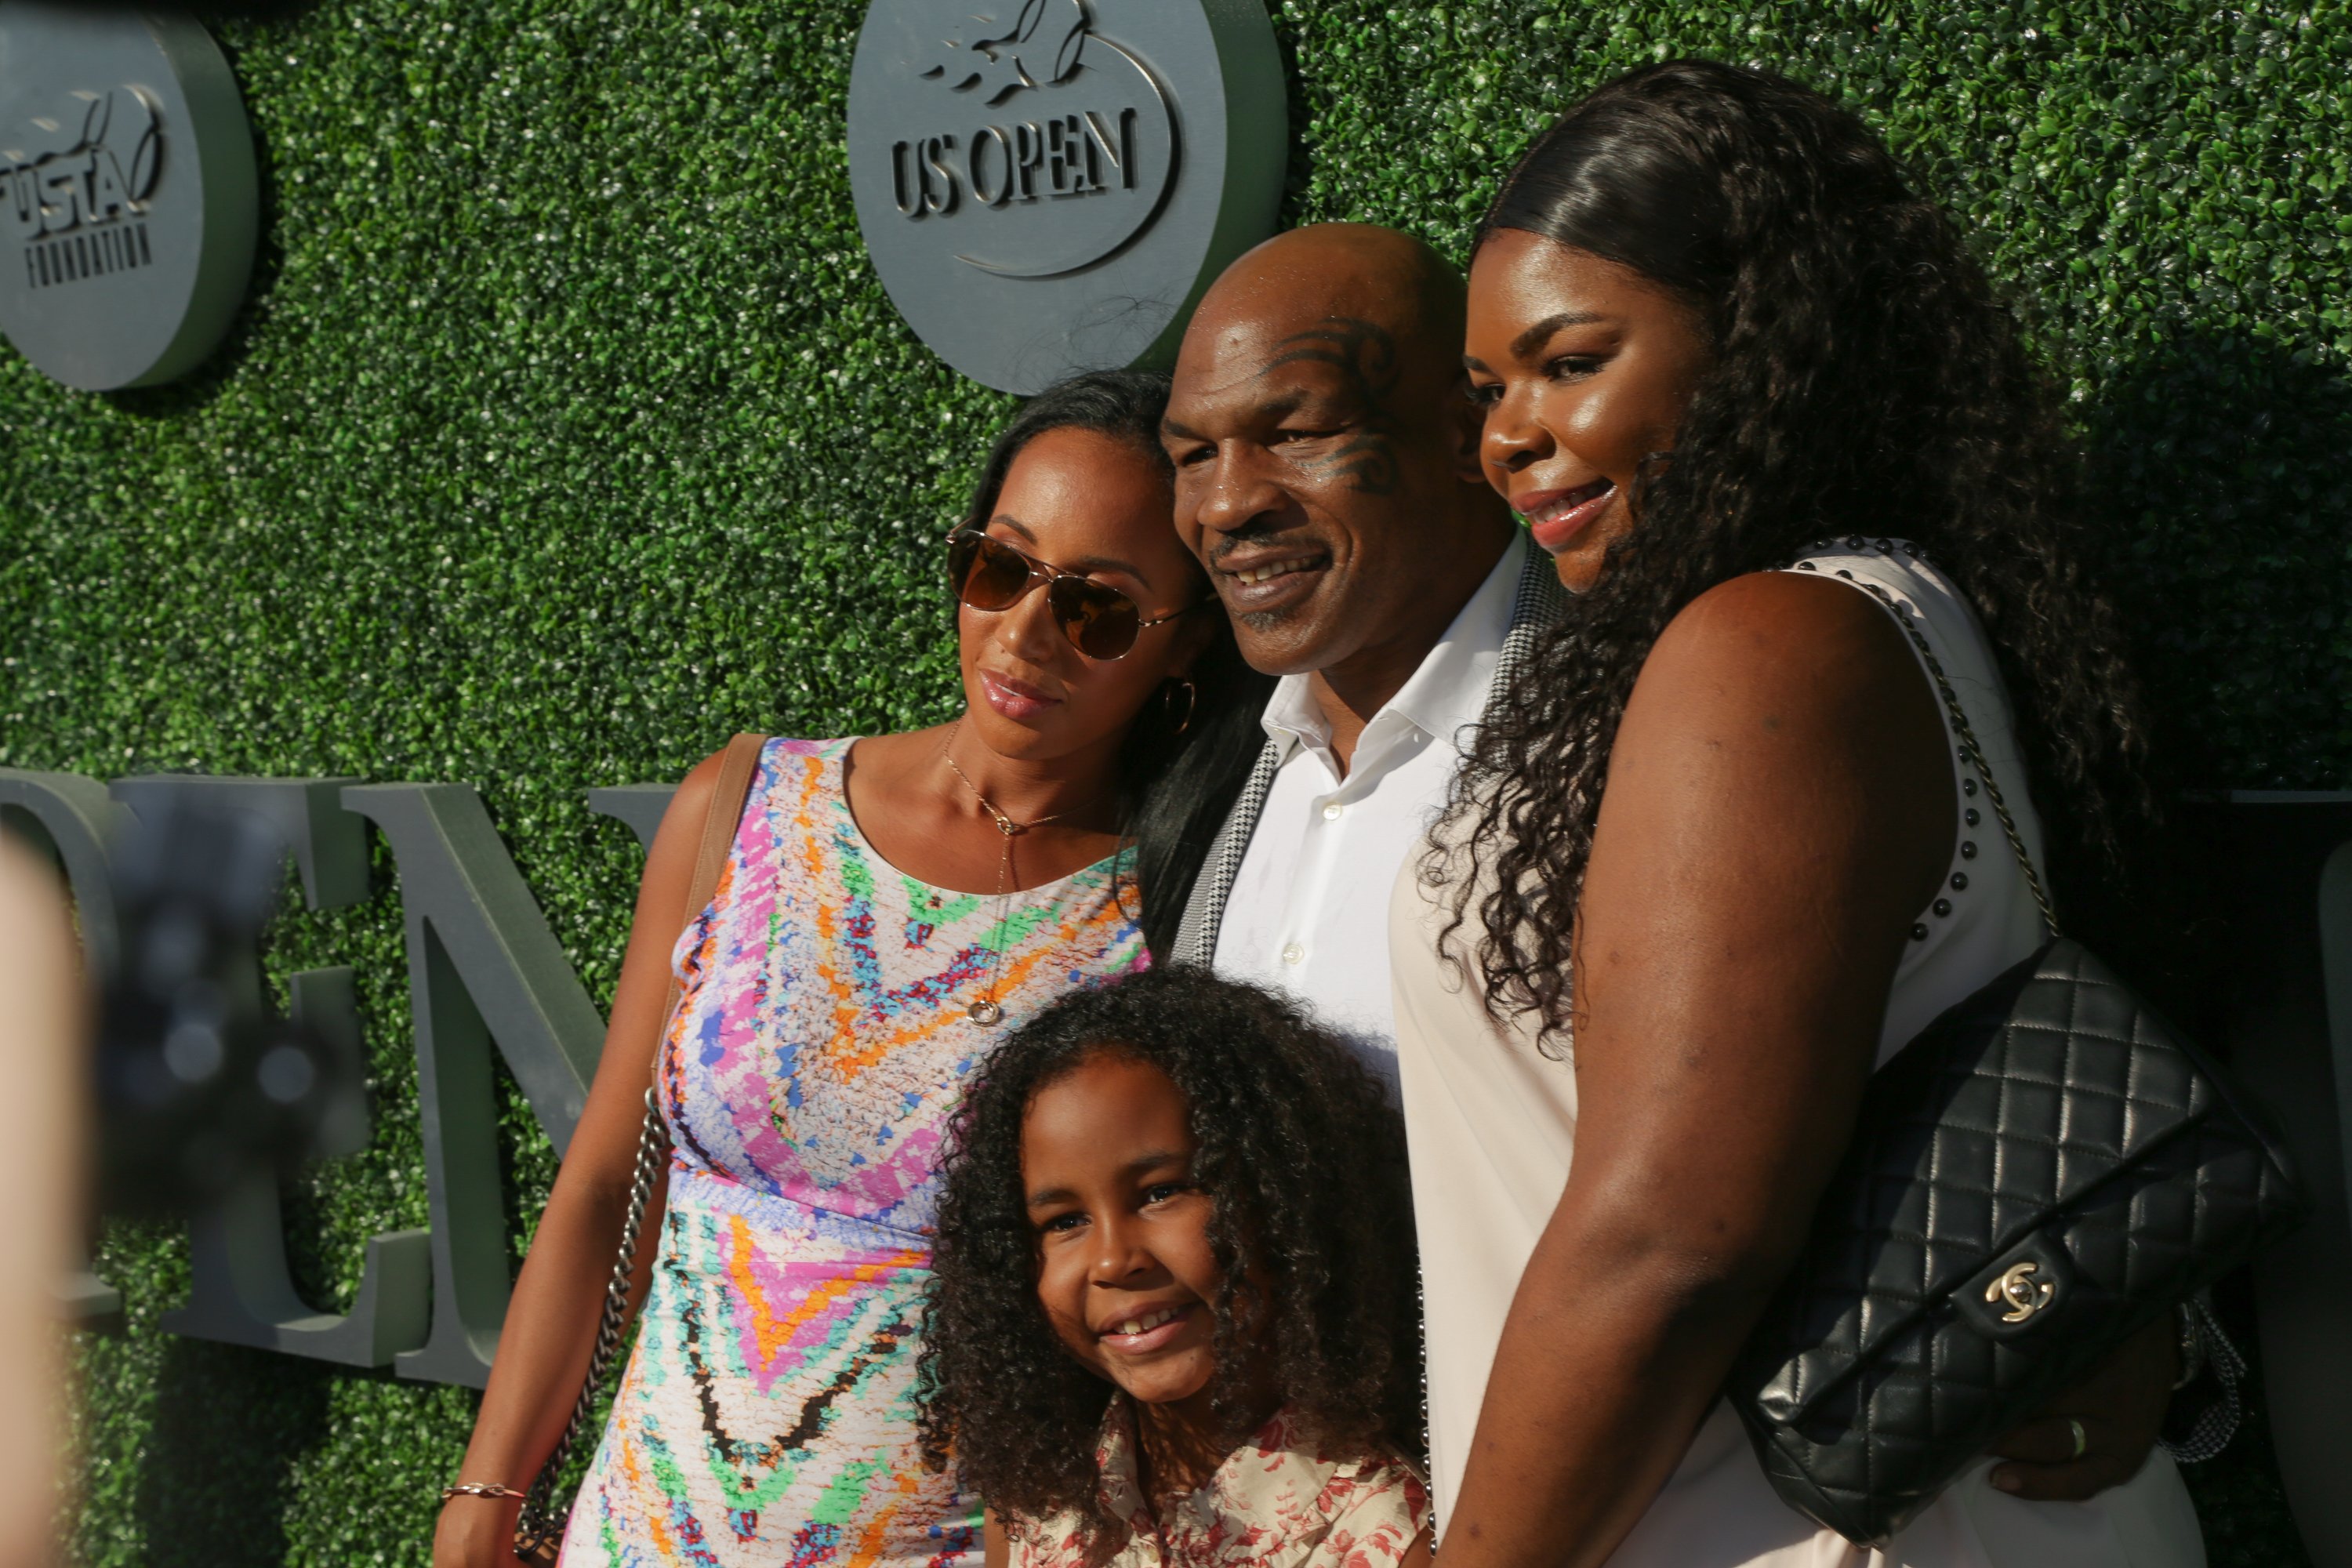 Retired boxing champion Mike Tyson (C) and family attend the 2016 US Open Opening Night held at the USTA Billie Jean King National Tennis Center on August 29, 2016, in New York City. | Source: Getty Images